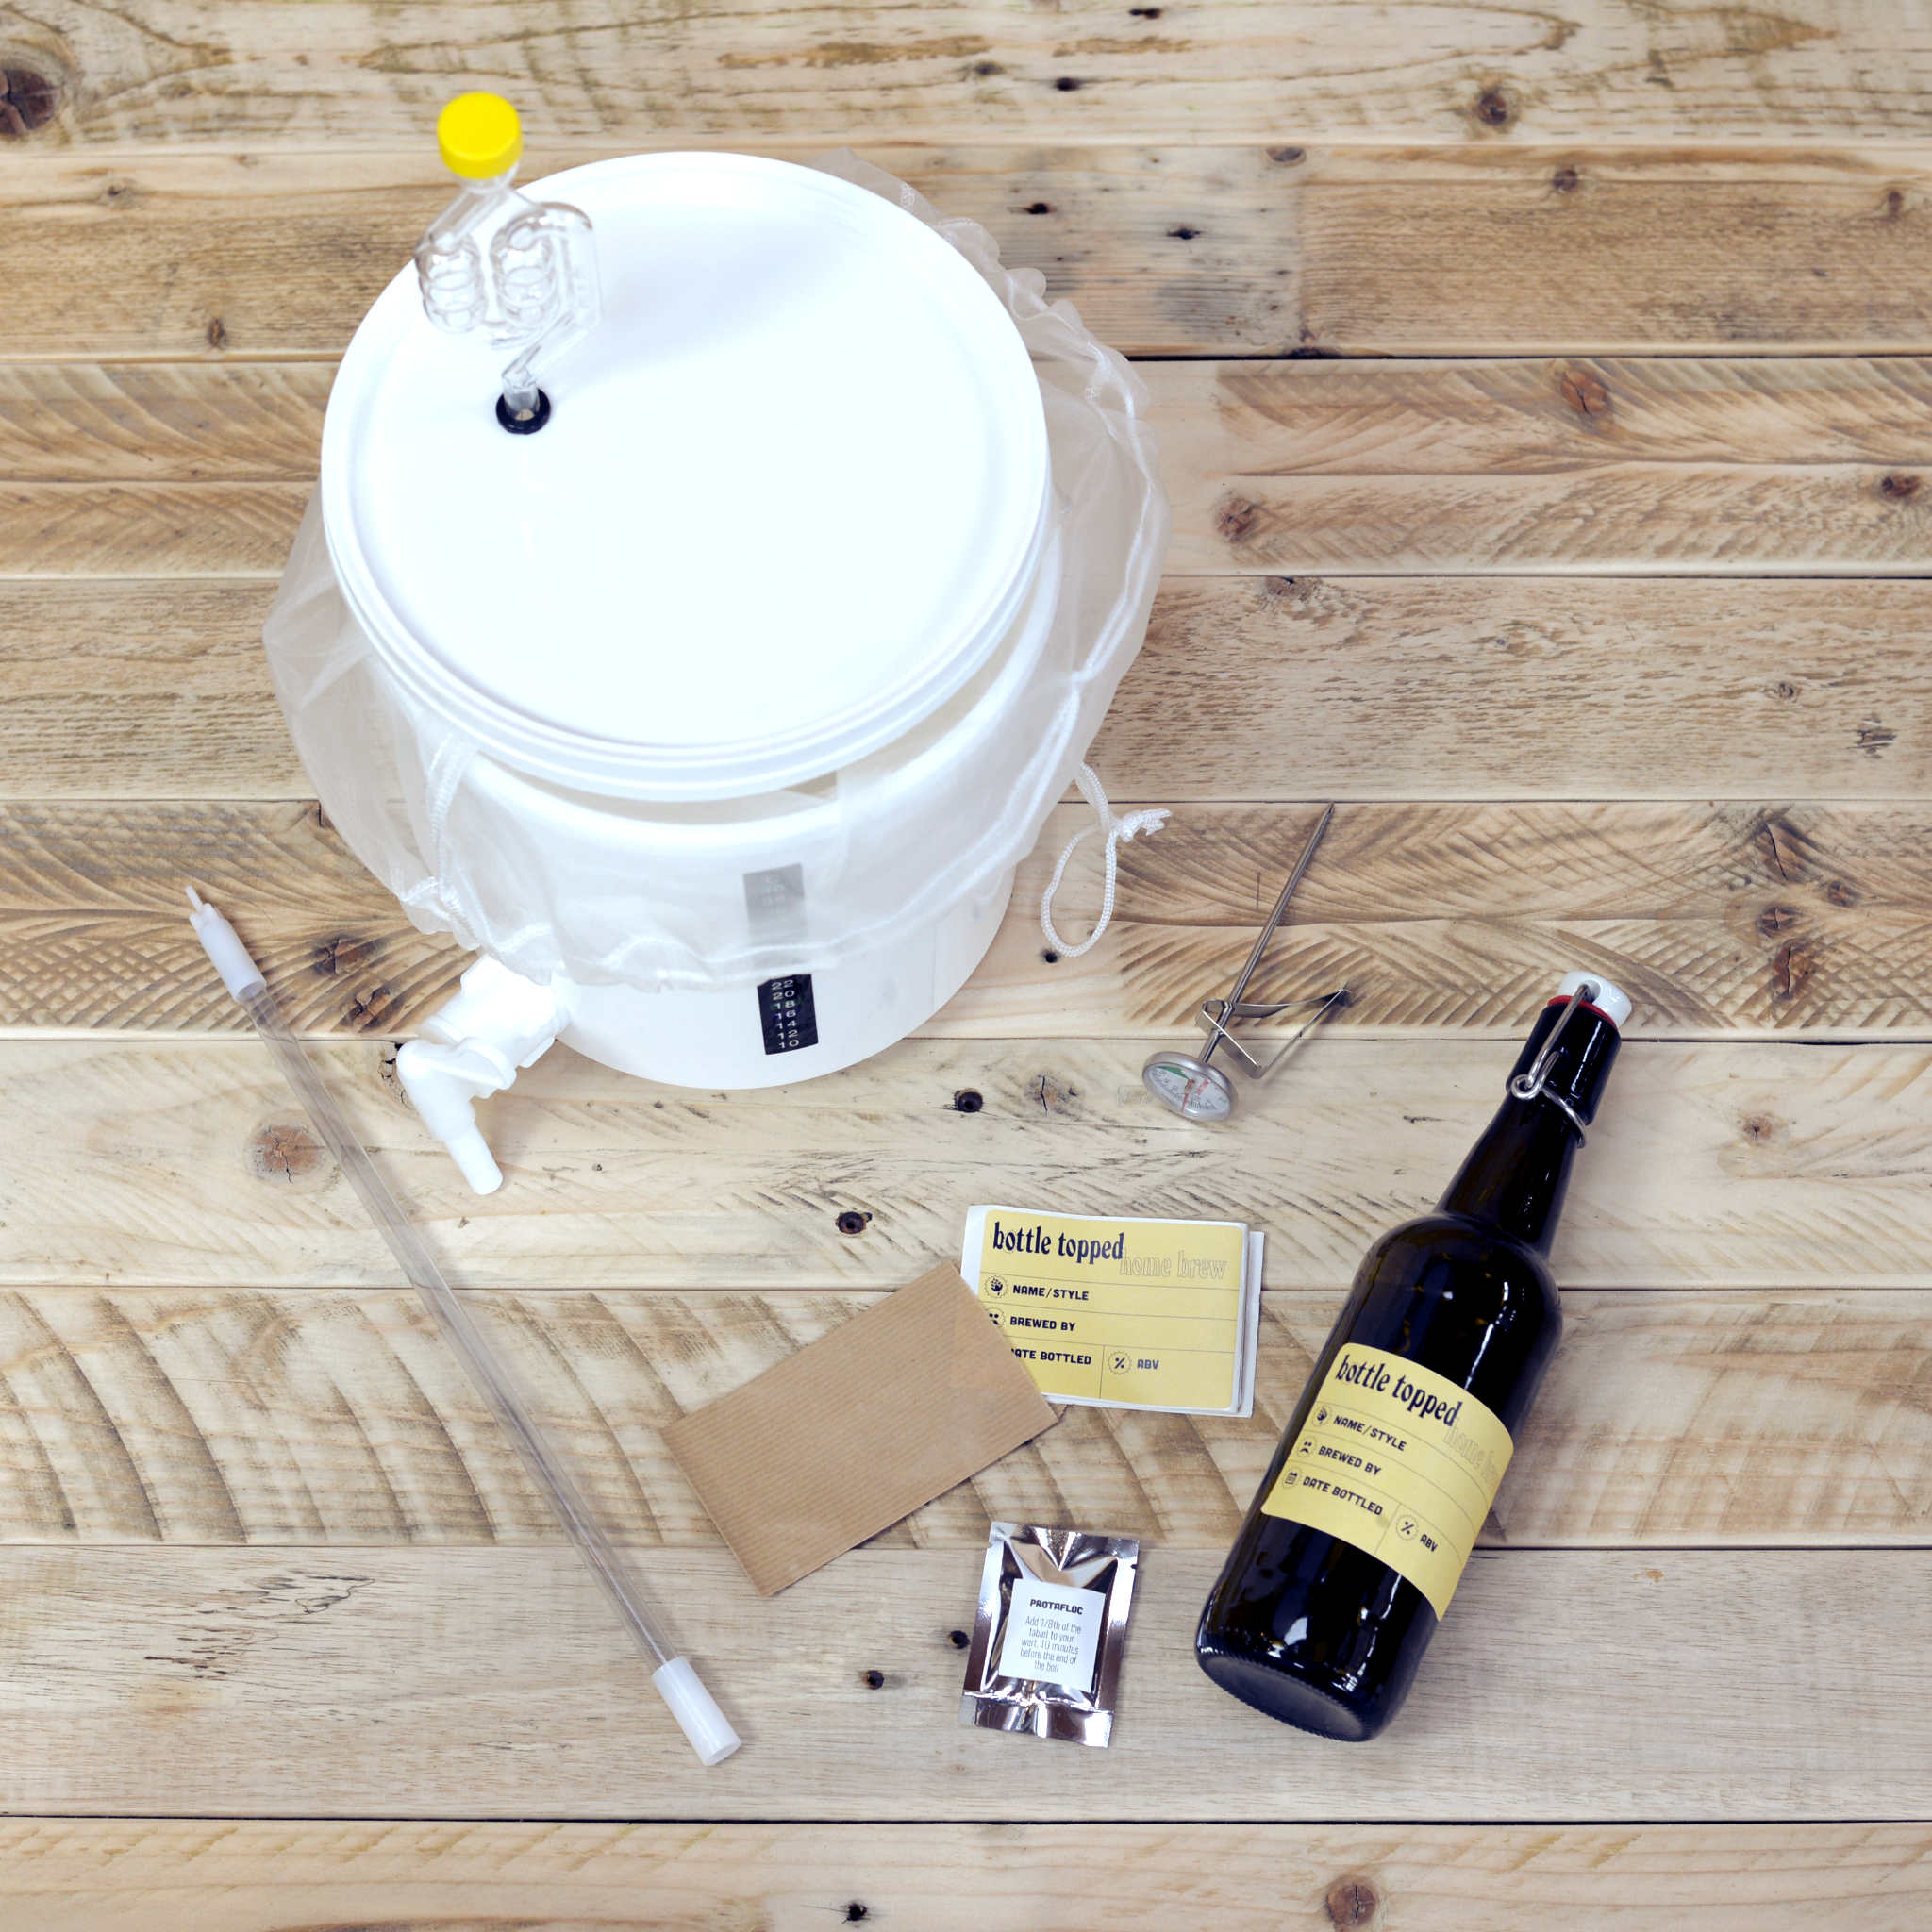 Home Brewing Equipment 101